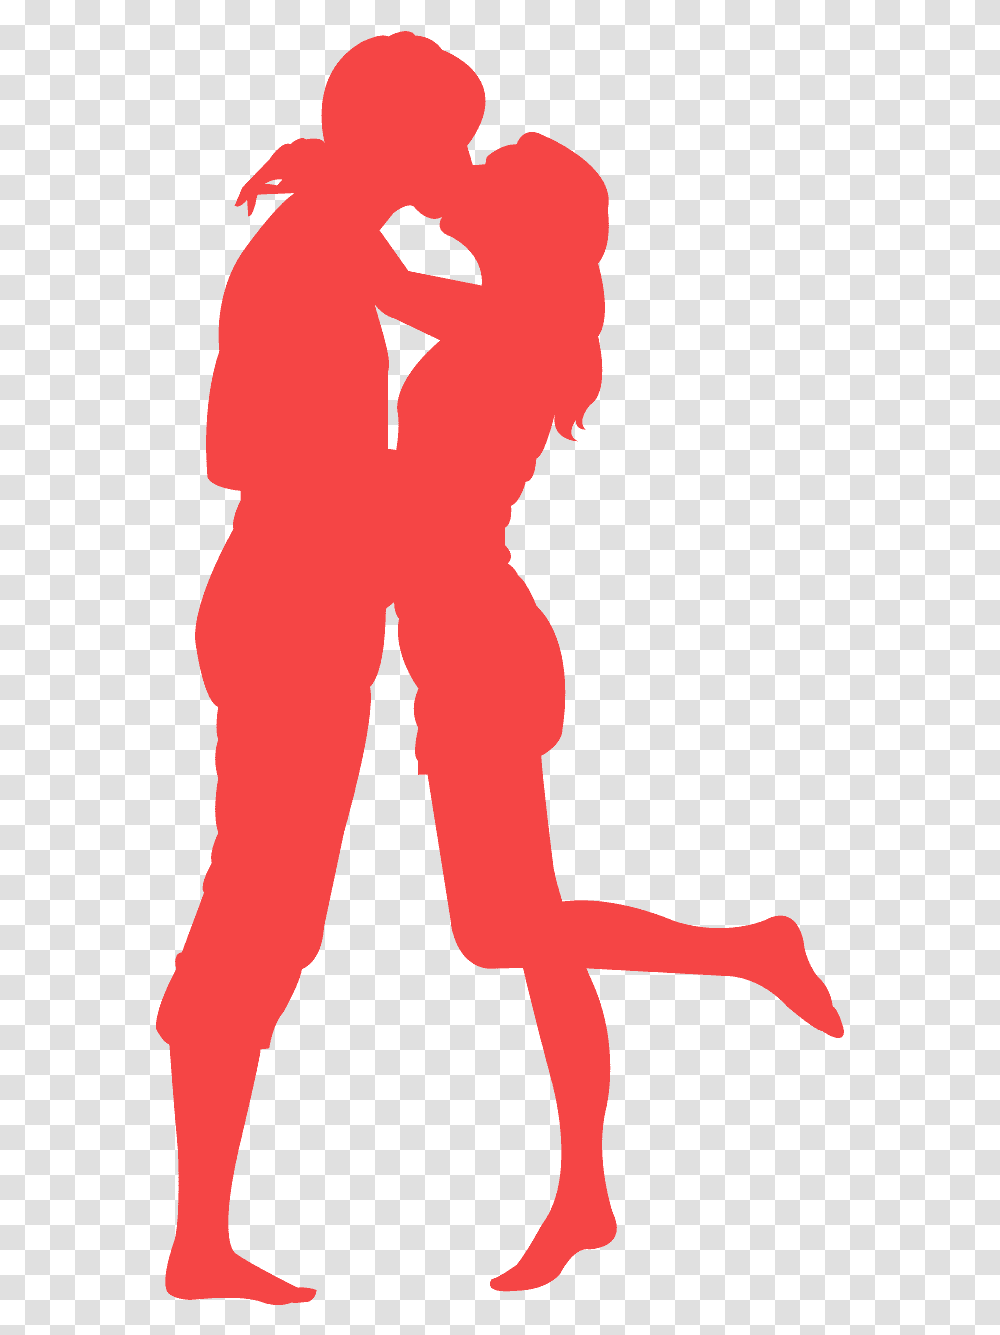 Silueta Hombre Y Mujer Besandose, Hand, Person, Human, Fist Transparent Png